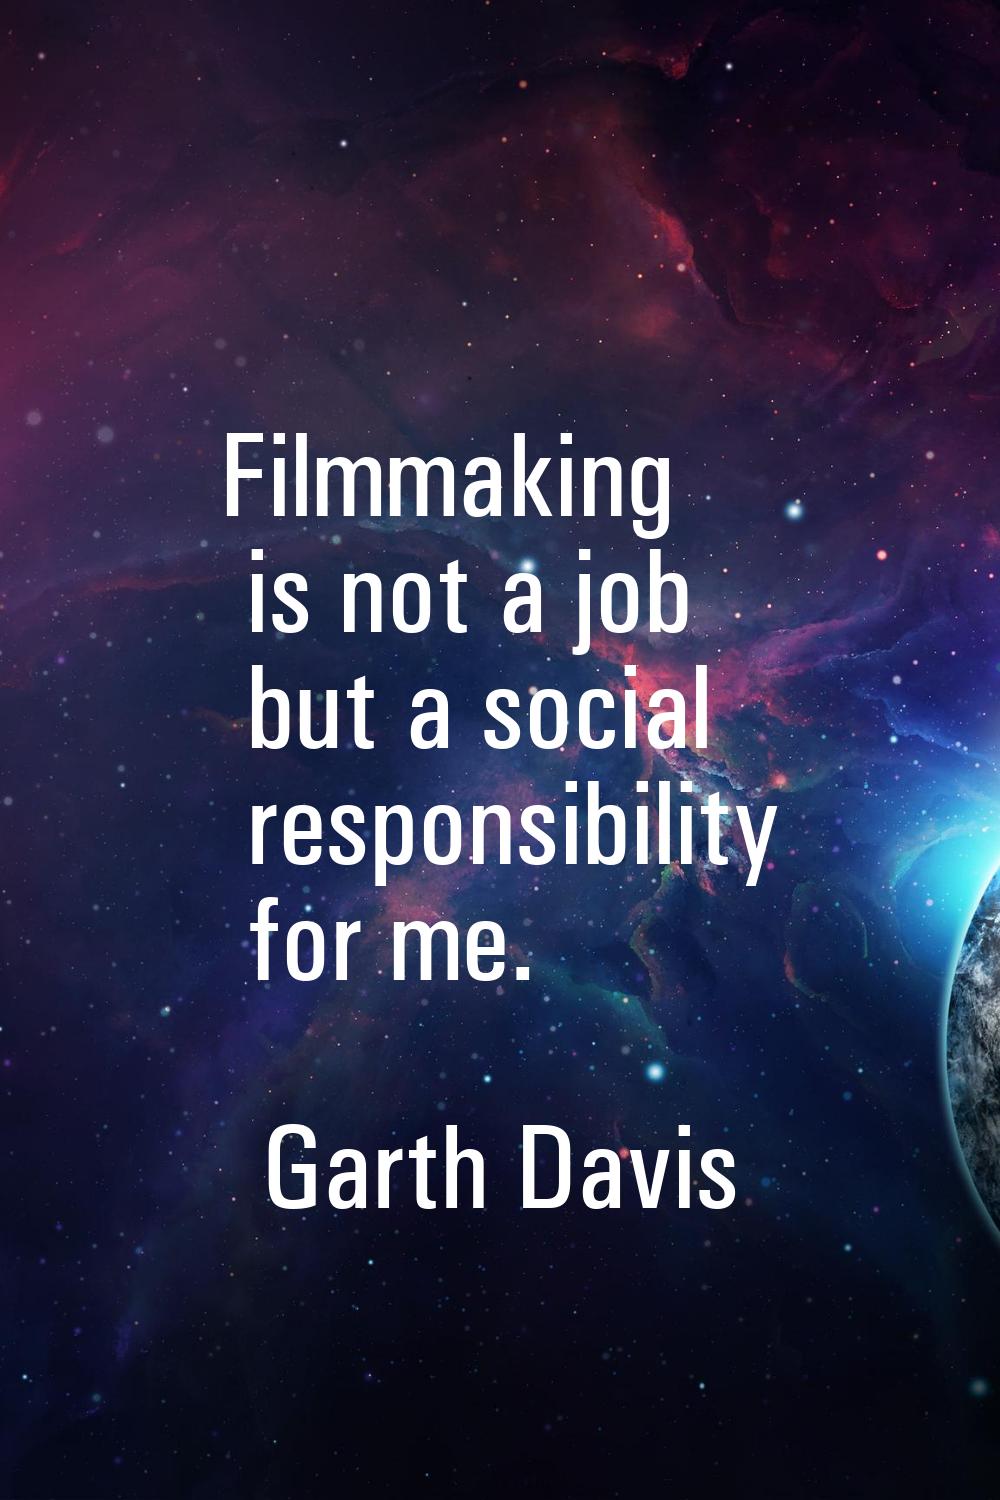 Filmmaking is not a job but a social responsibility for me.